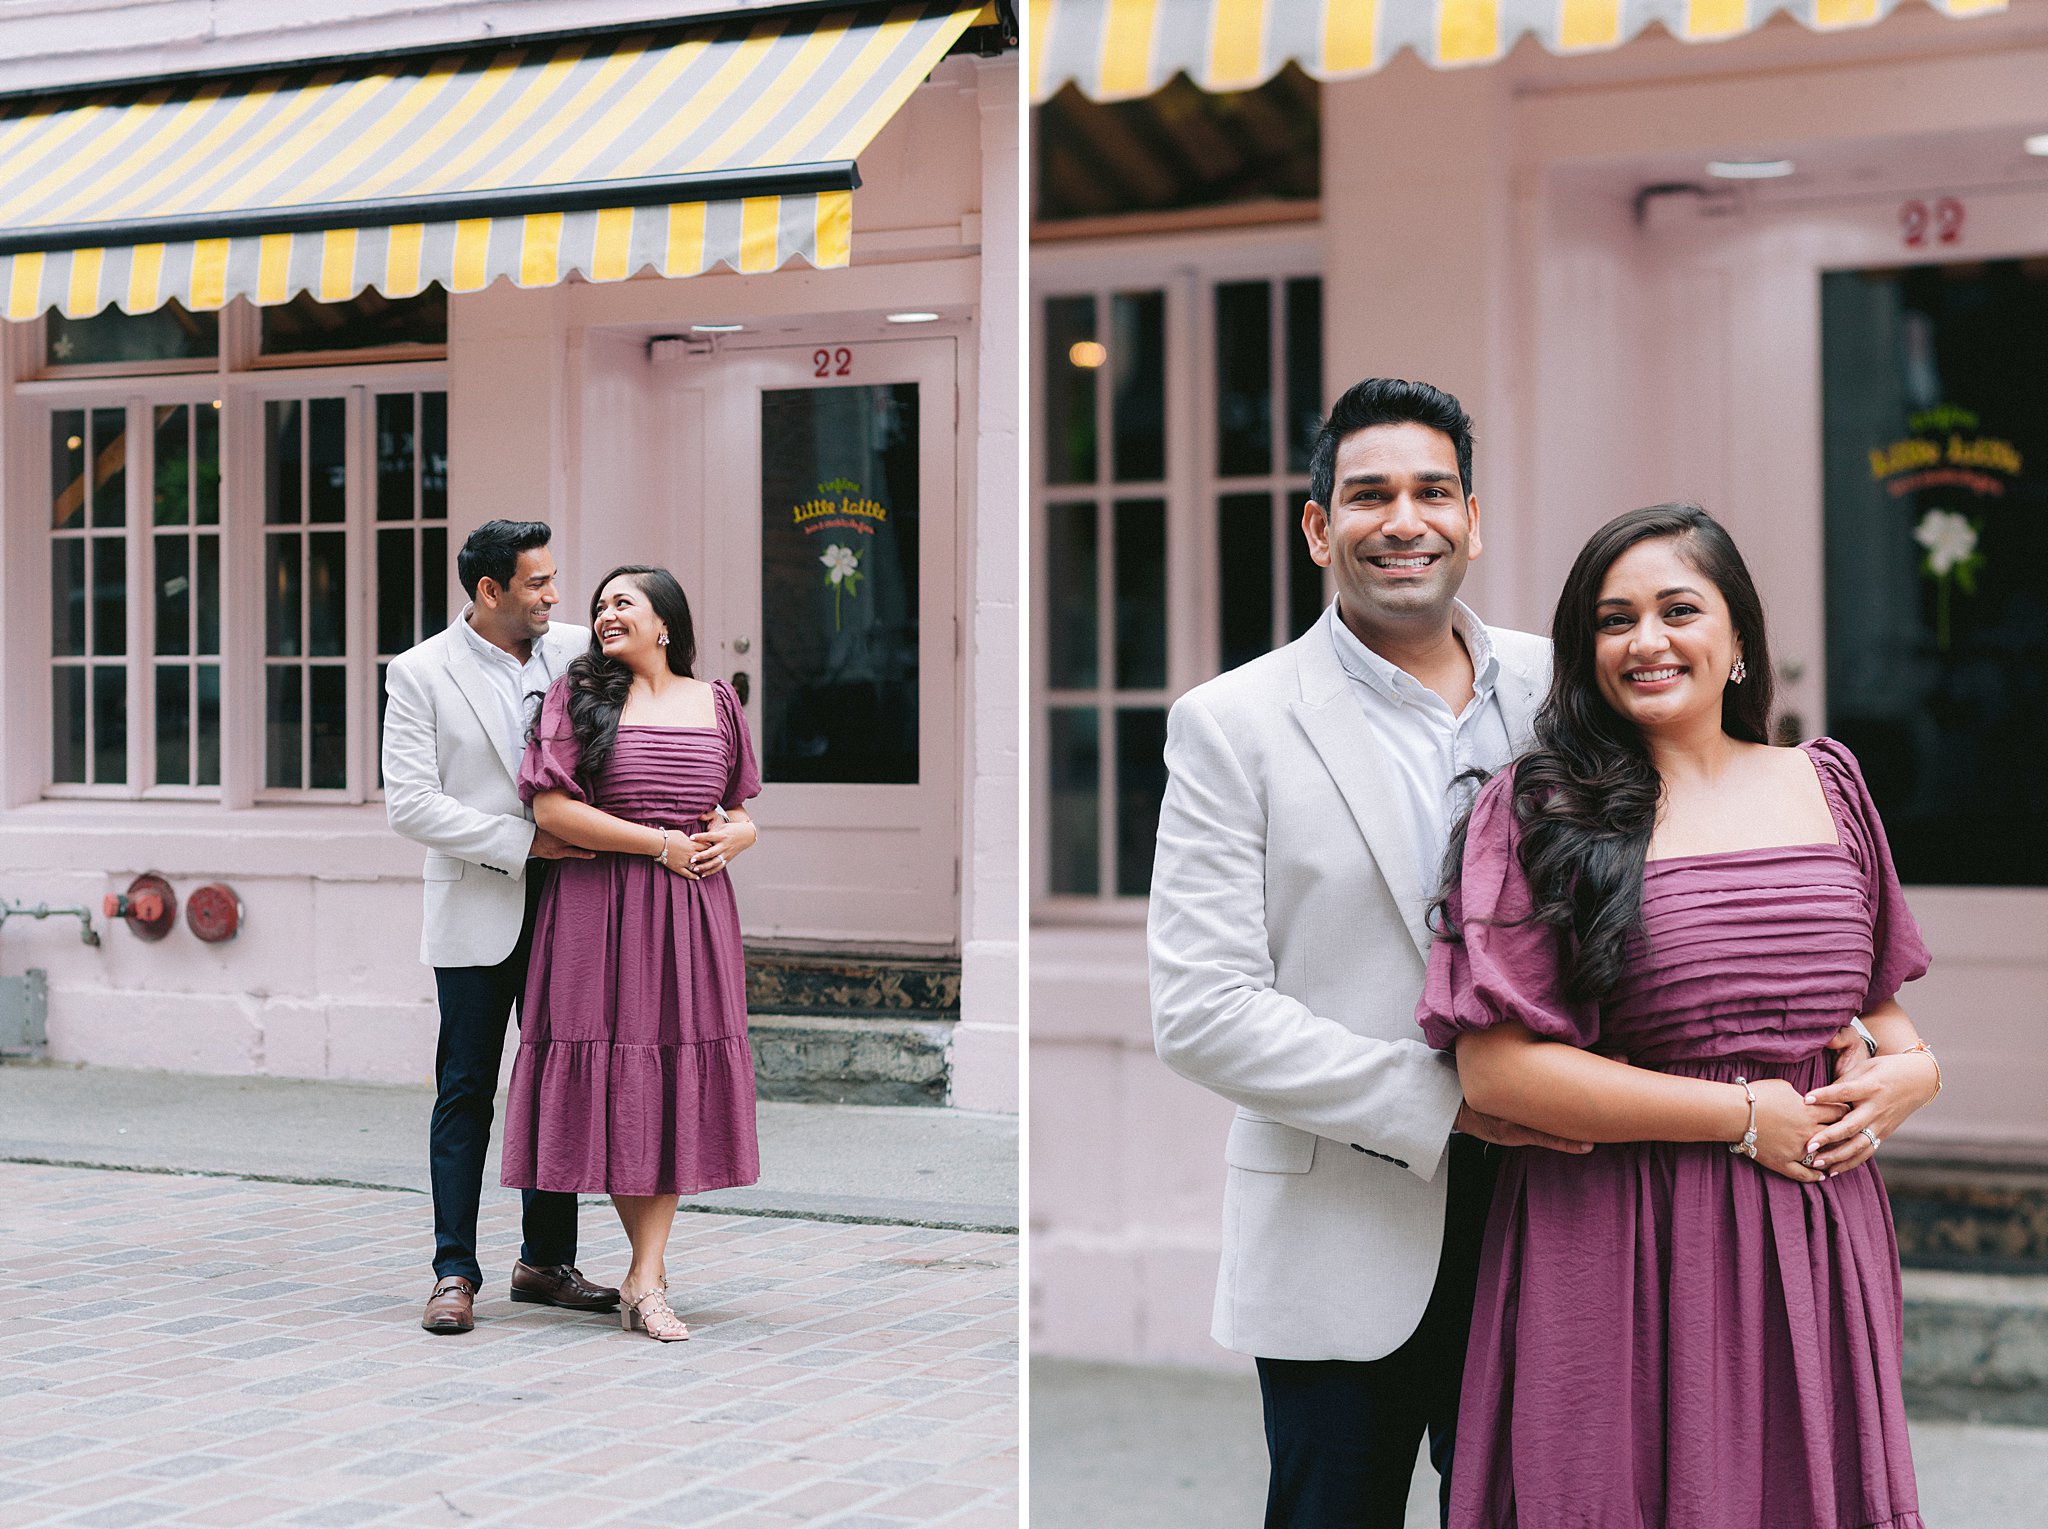 Cherishing their engagement in Montreal's captivating scenery